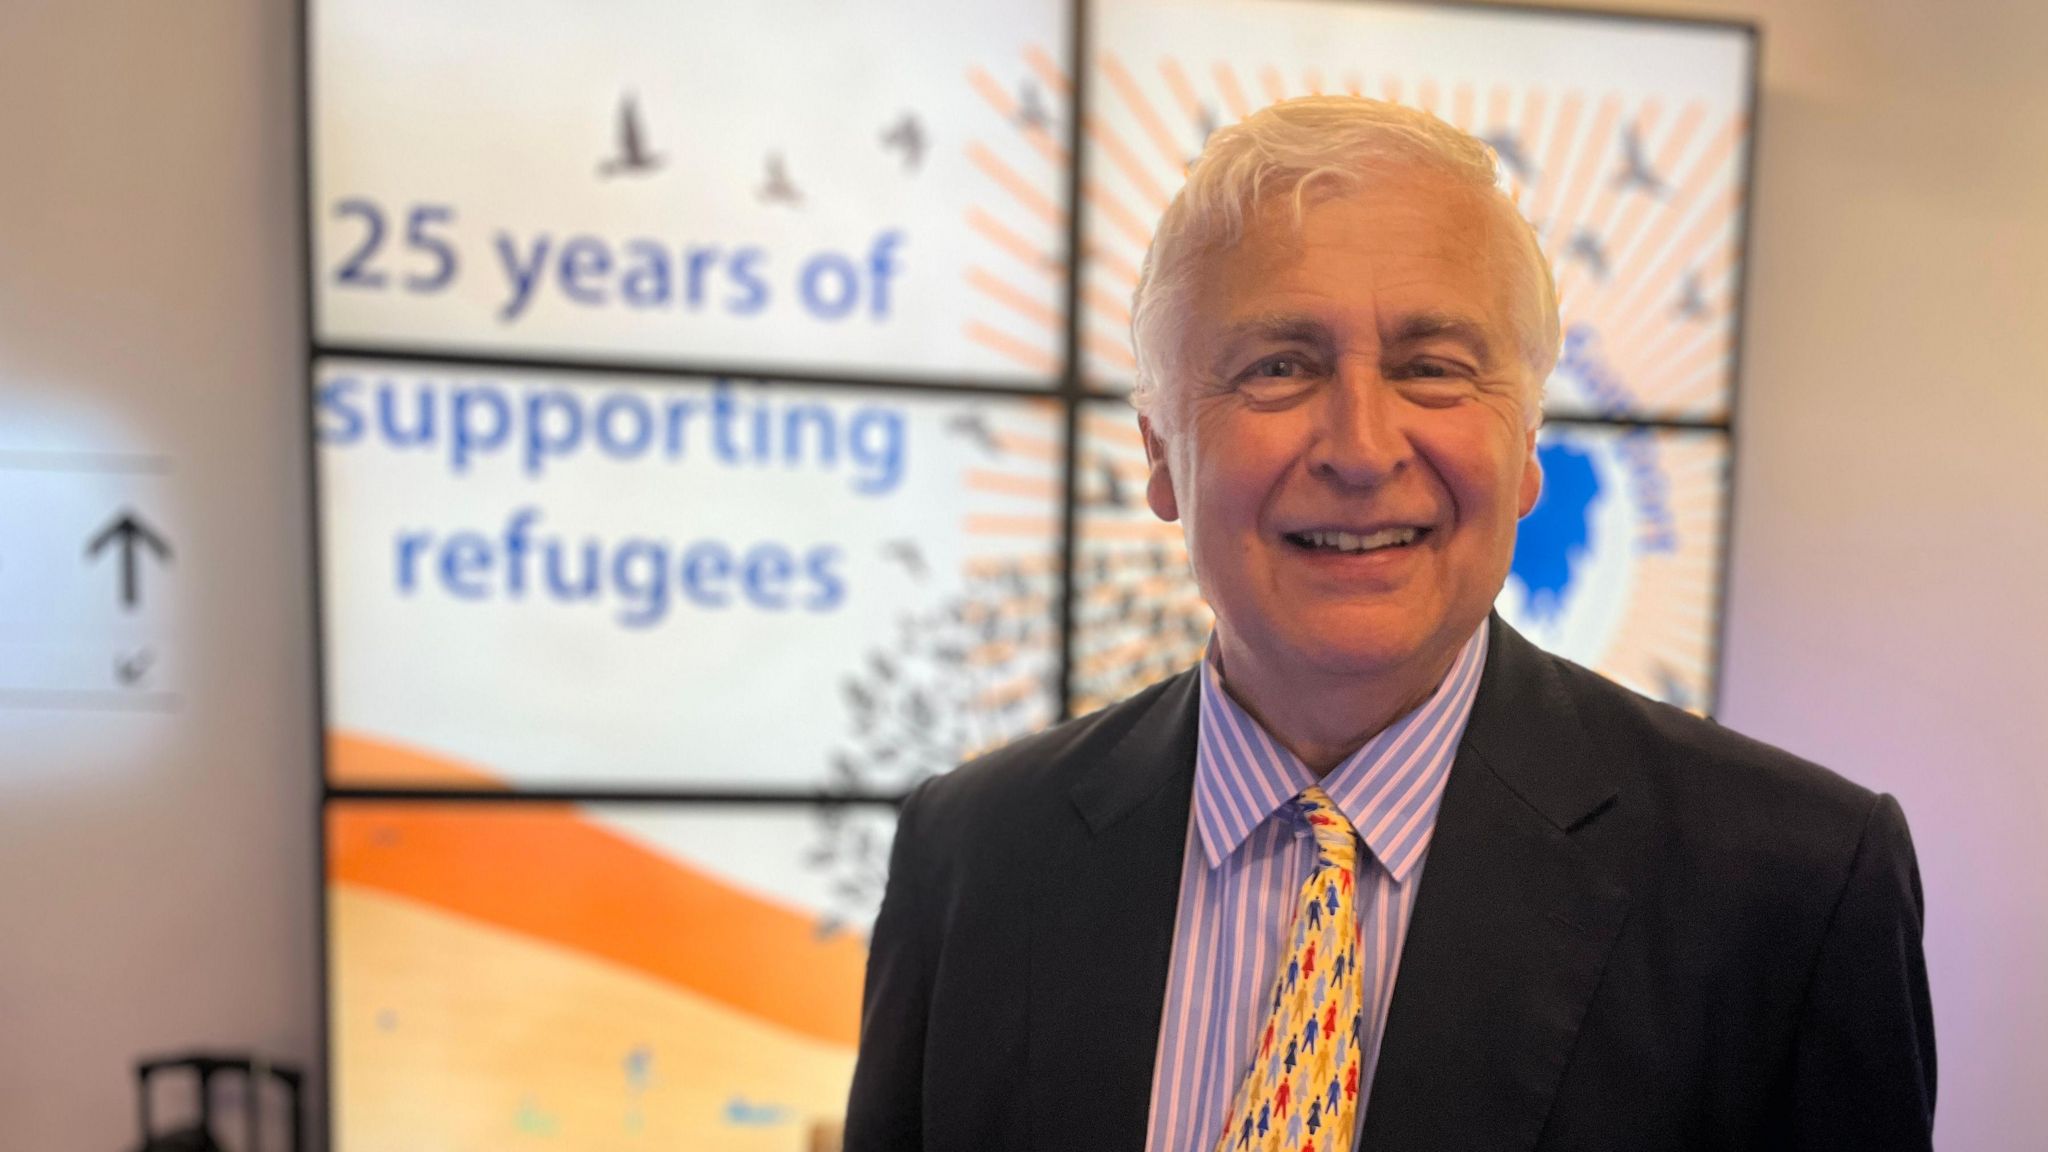 Sir Nick Young wearing a suit and tie stands in front of a banner saying 25 years of supporting refugees